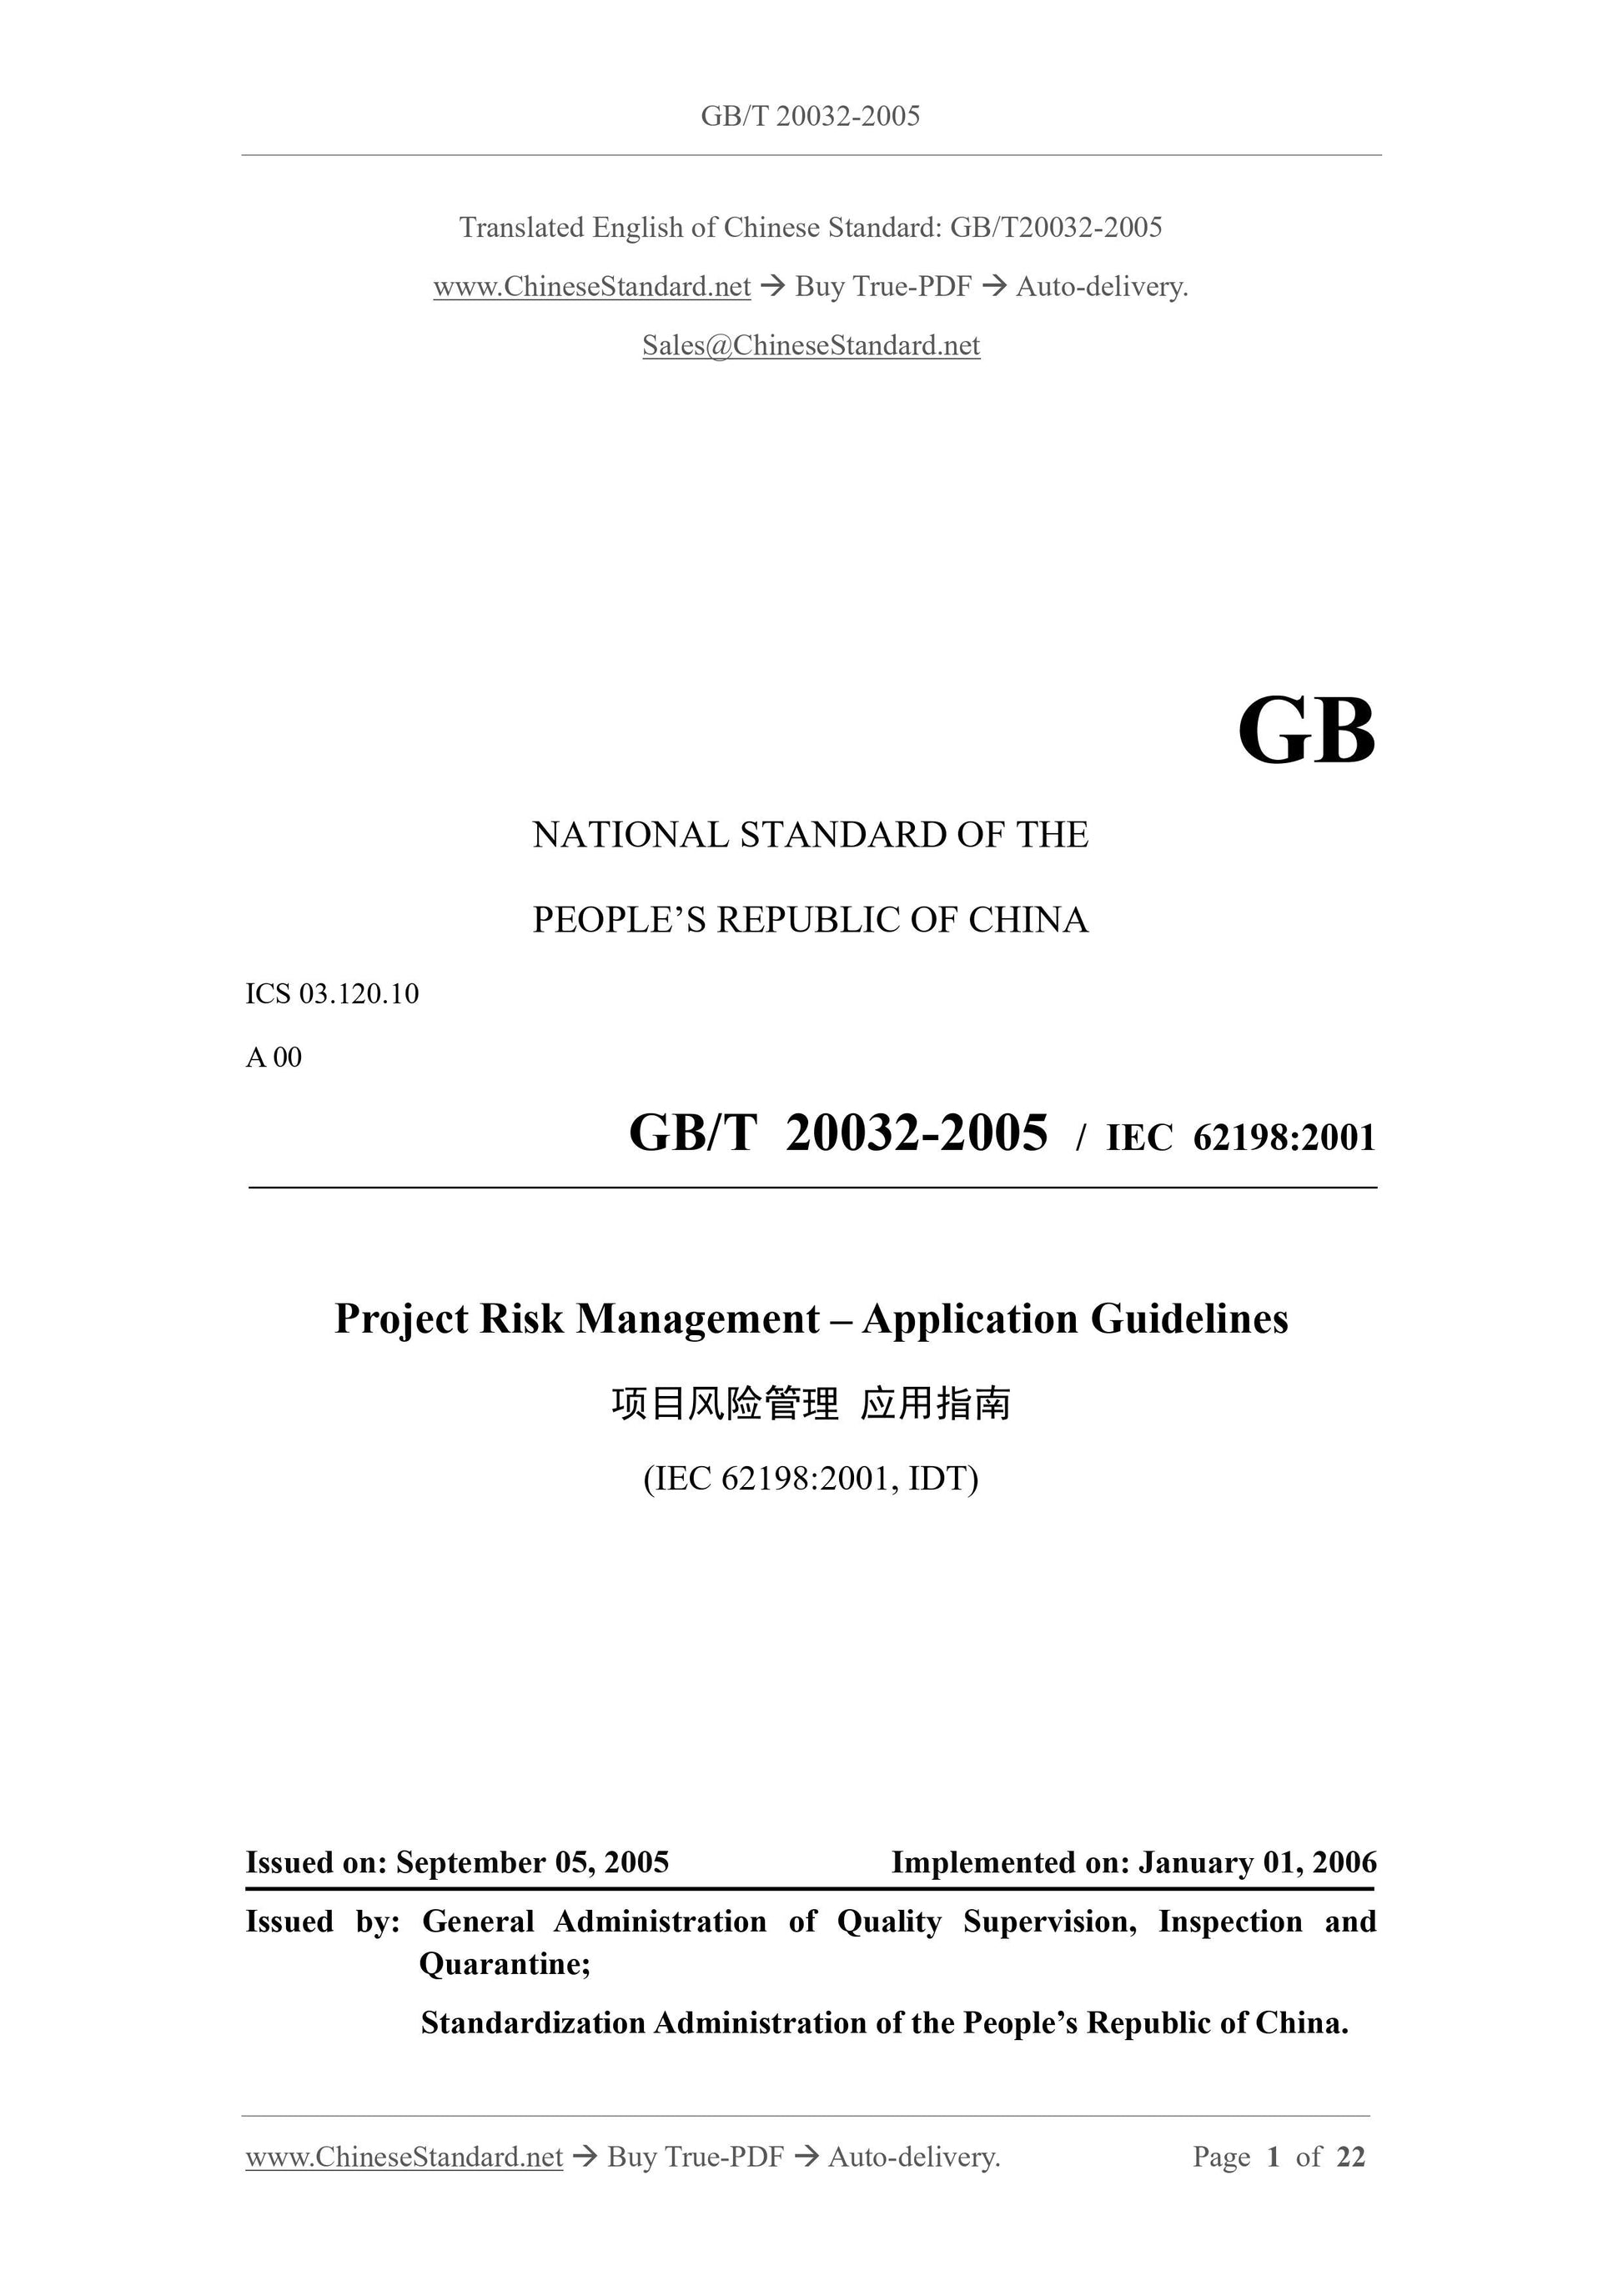 GB/T 20032-2005 Page 1